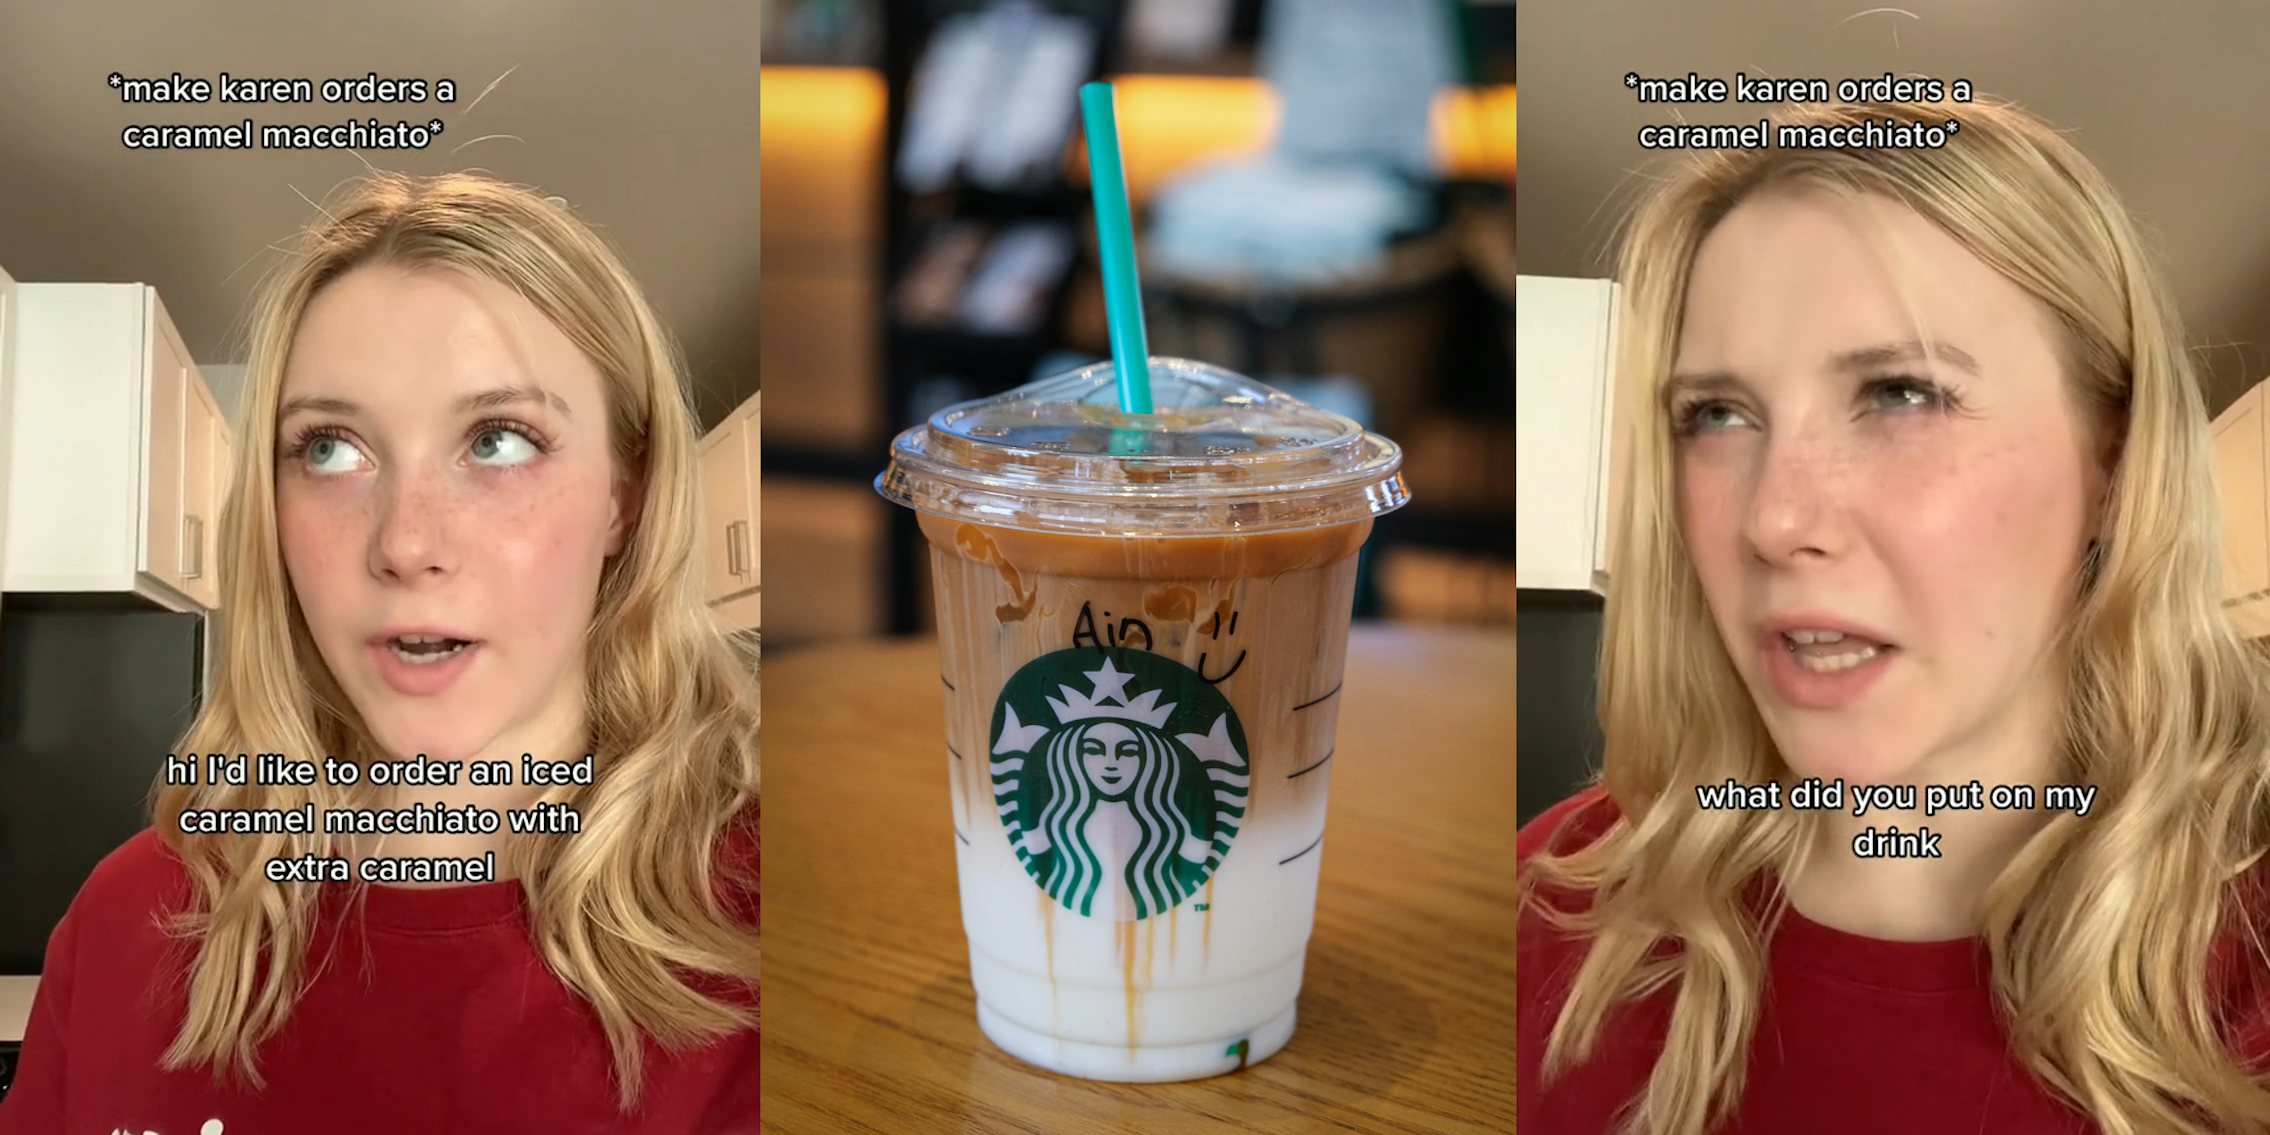 Starbucks employee with caption '*make karen orders a caramel macchiato* 'hi I'd like to order an iced caramel macchiato with extra caramel' (l) Starbucks caramel macchiato on table (c) Starbucks employee with caption '*make karen orders a caramel macchiato* 'what did you out on my drink' (r)